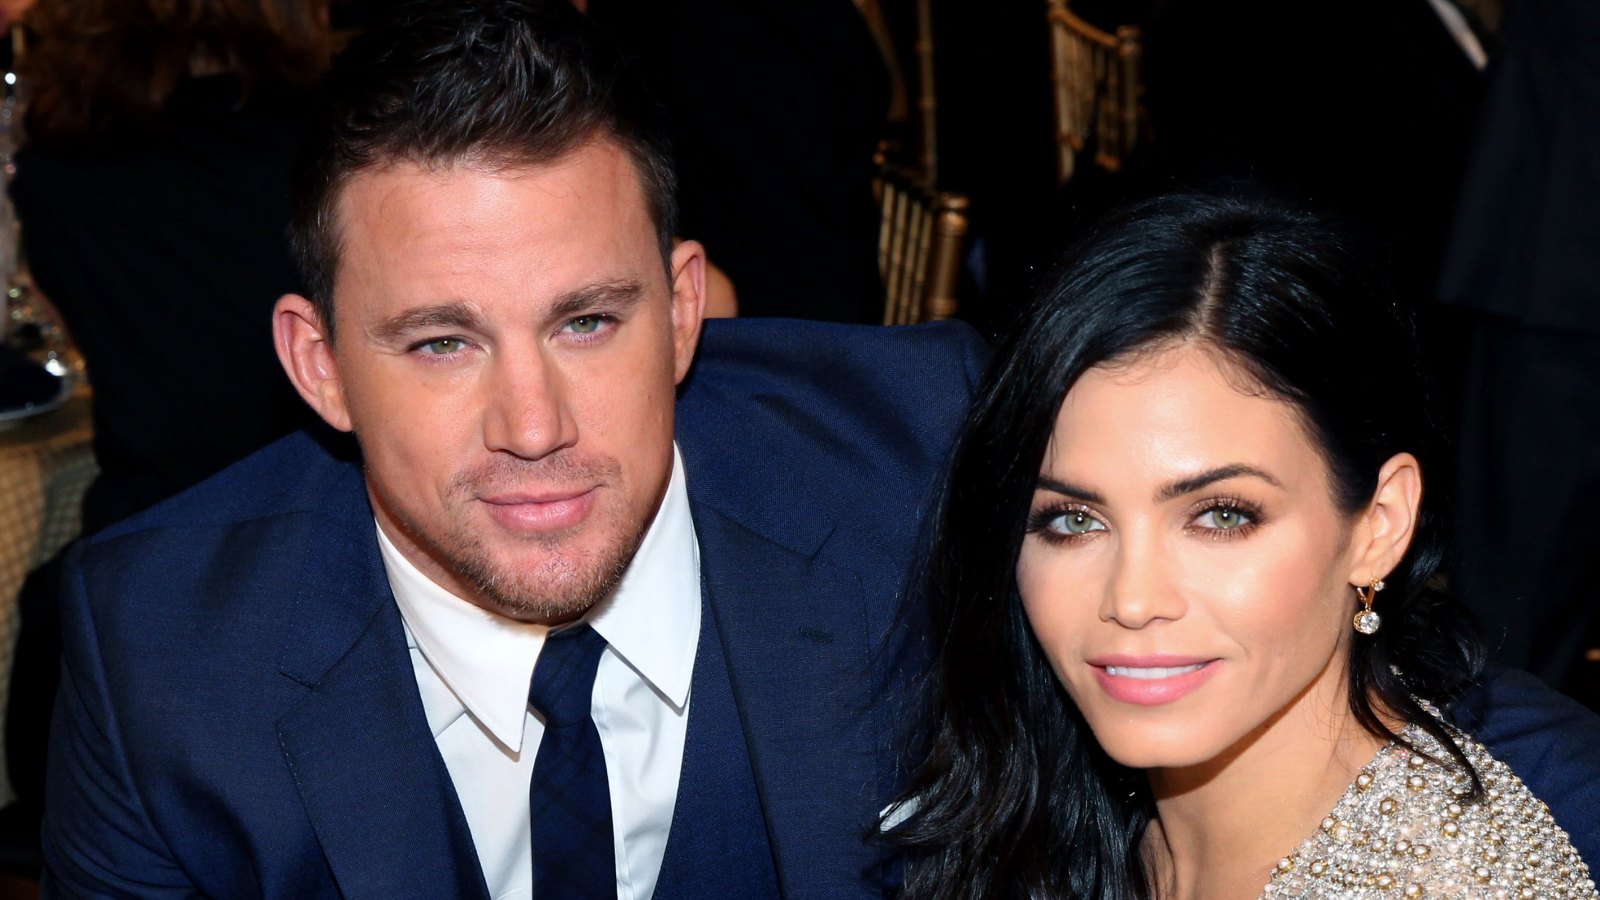 Channing Tatum and Jenna Dewan to Reunite for Family Court Mediation